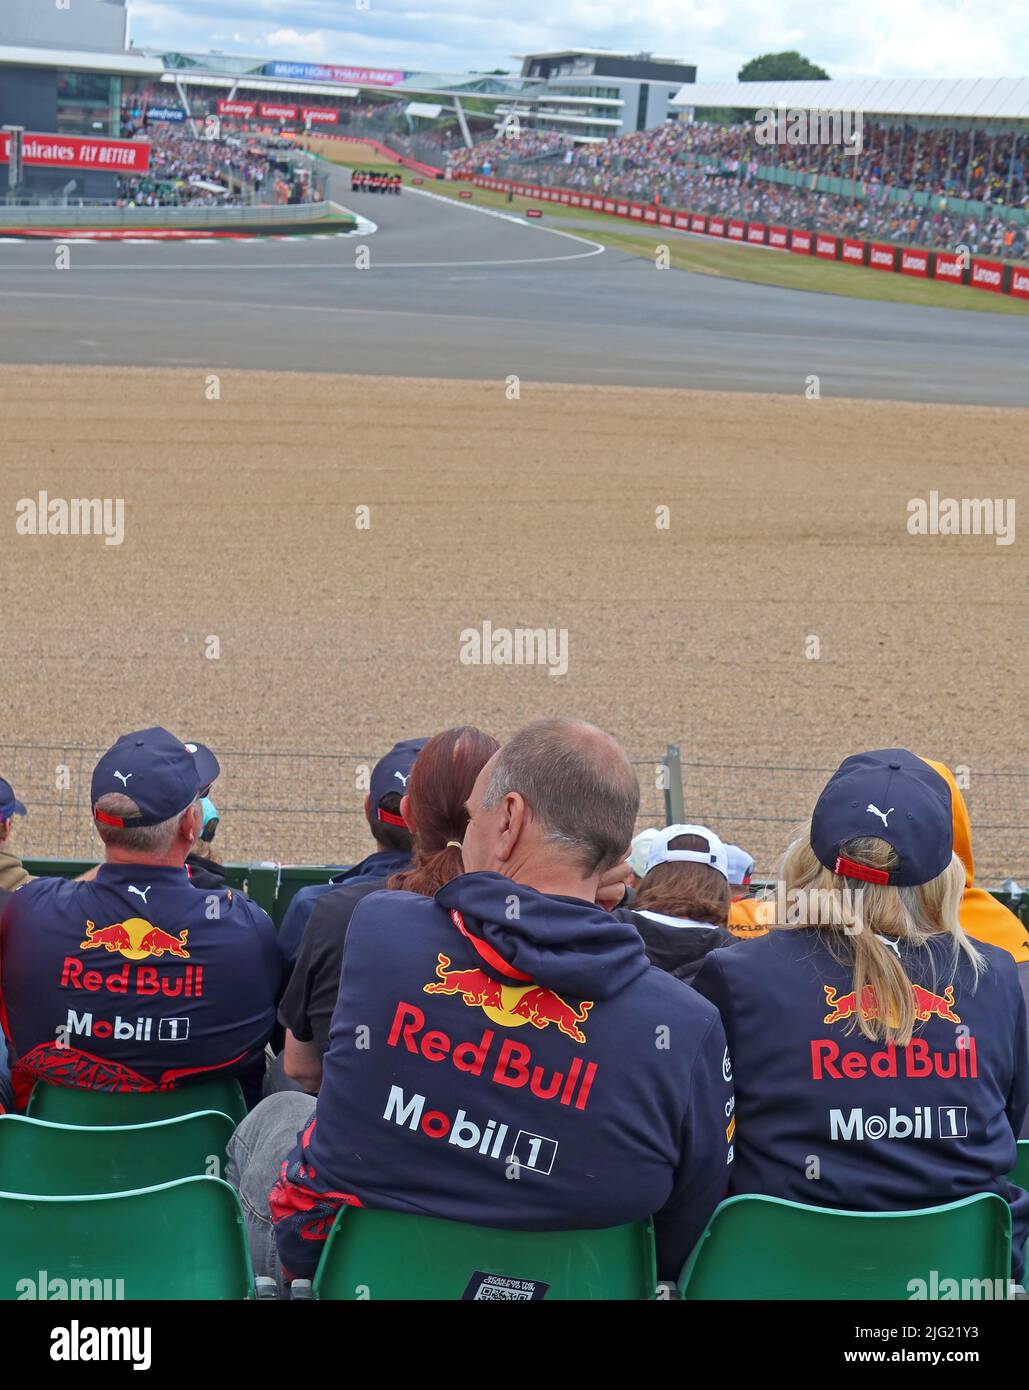 Red Bull racing, fans at Silverstone Circuit for the F1 Grand Prix 2022, Silverstone,Towcester, Northamptonshire,England, UK,NN12 8T Stock Photo